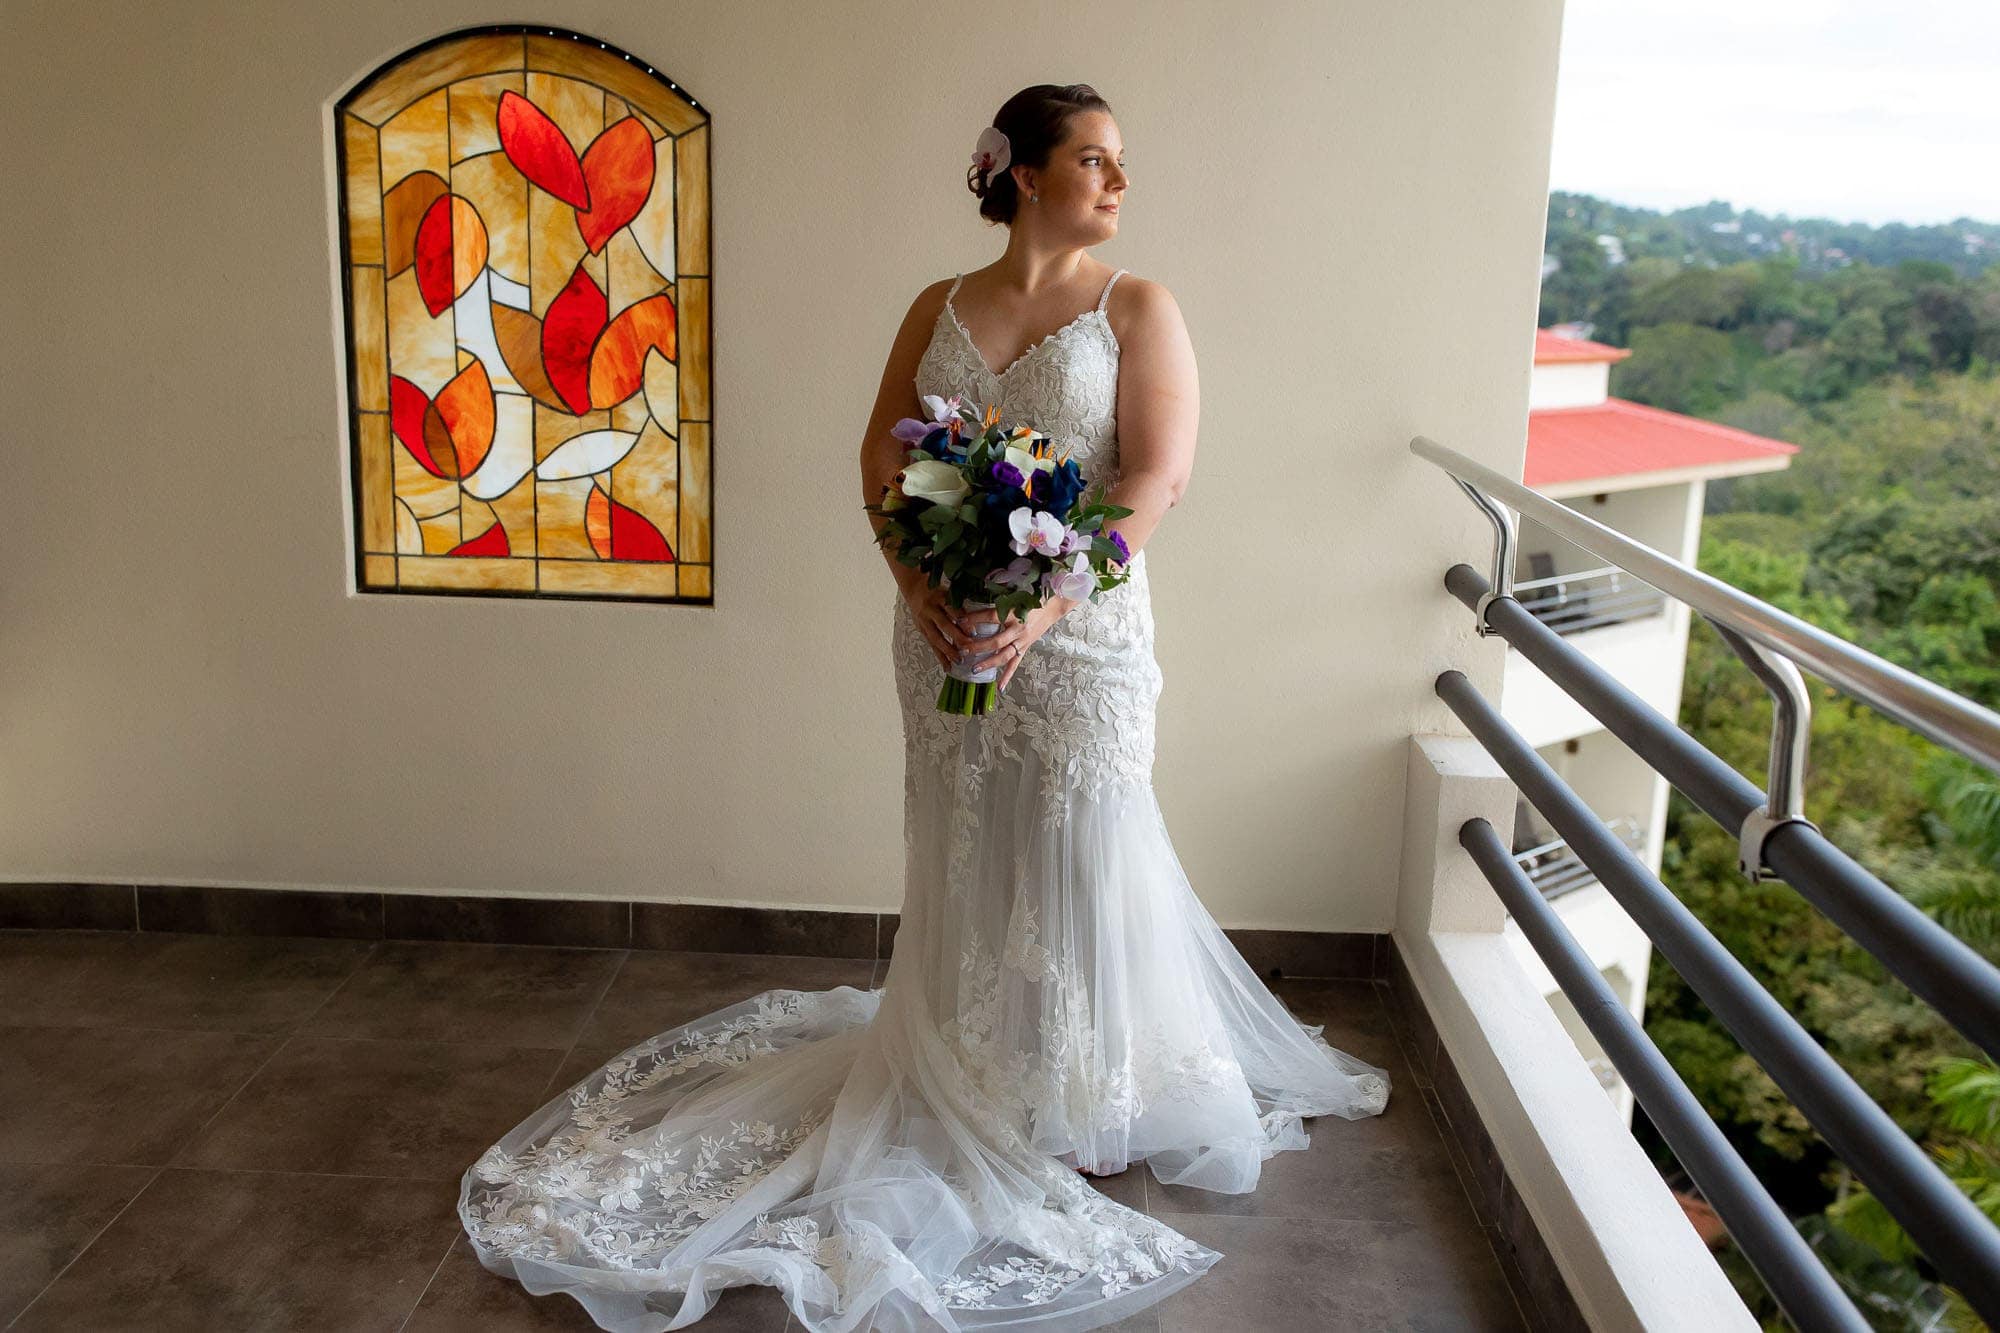 The bride ready for her elopement at Hotel Parador in Costa Rica